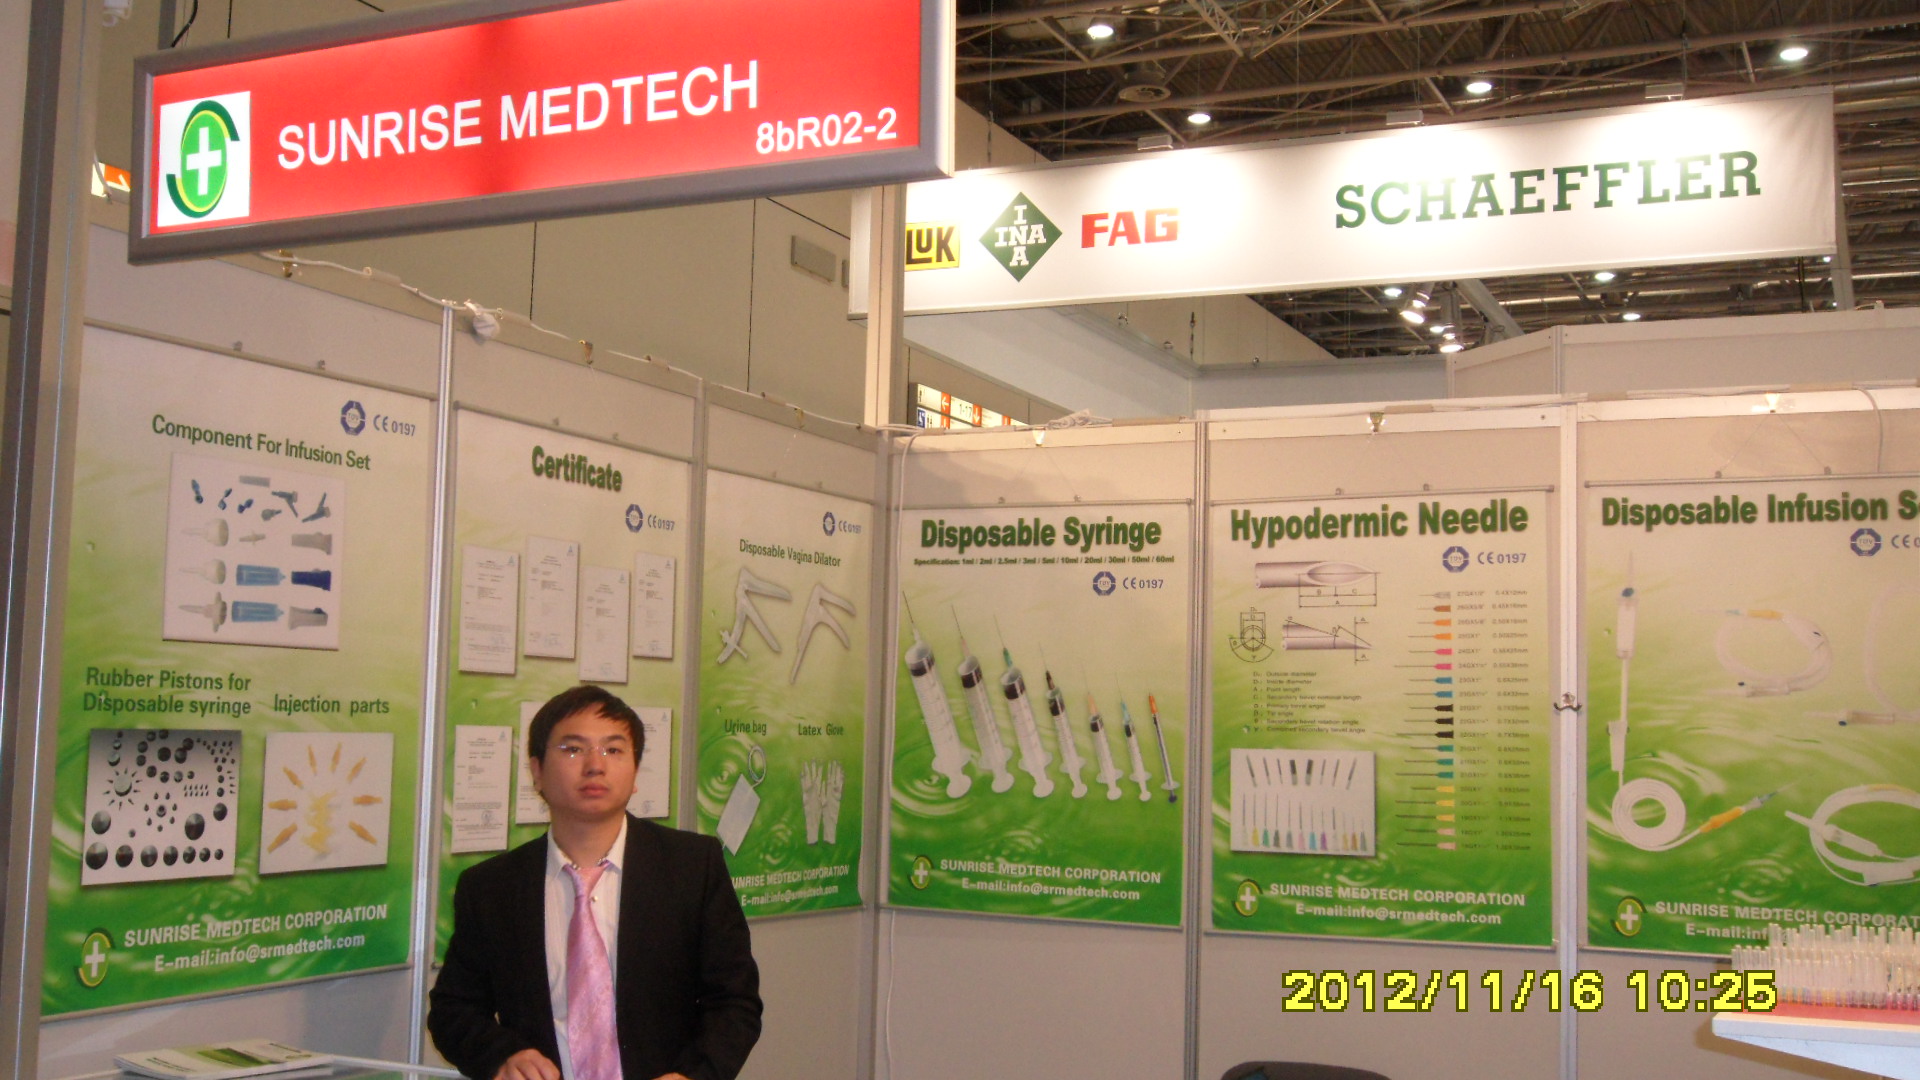 medica companmed in germany